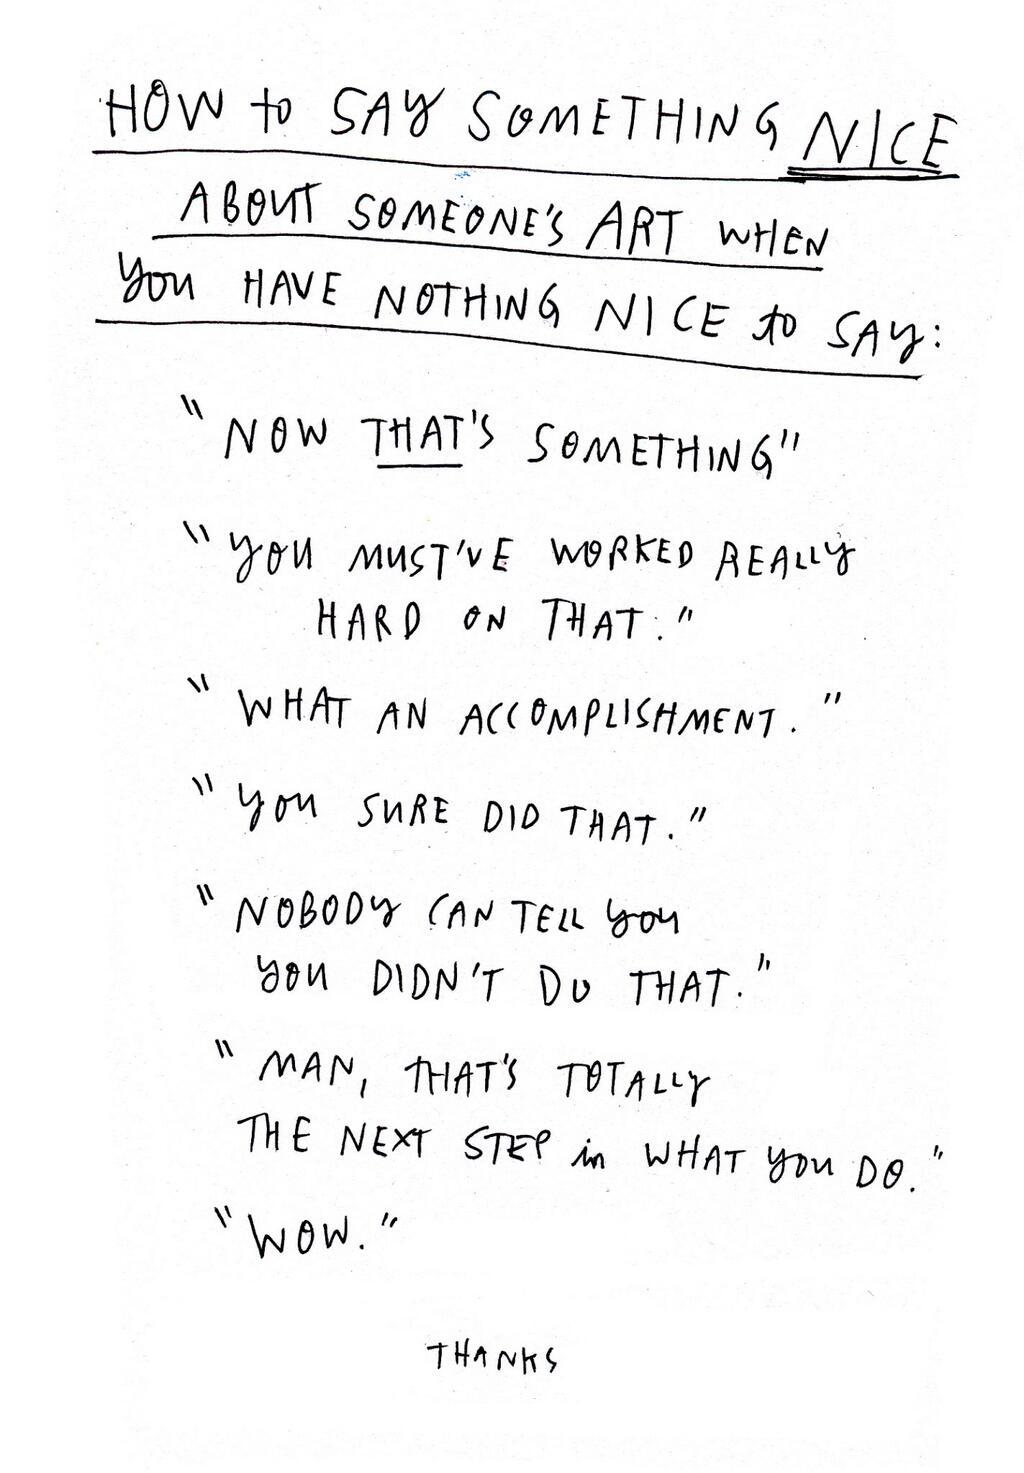 “How to say something nice about somebody’s art when you have nothing nice to say” by Wendy MacNaughton